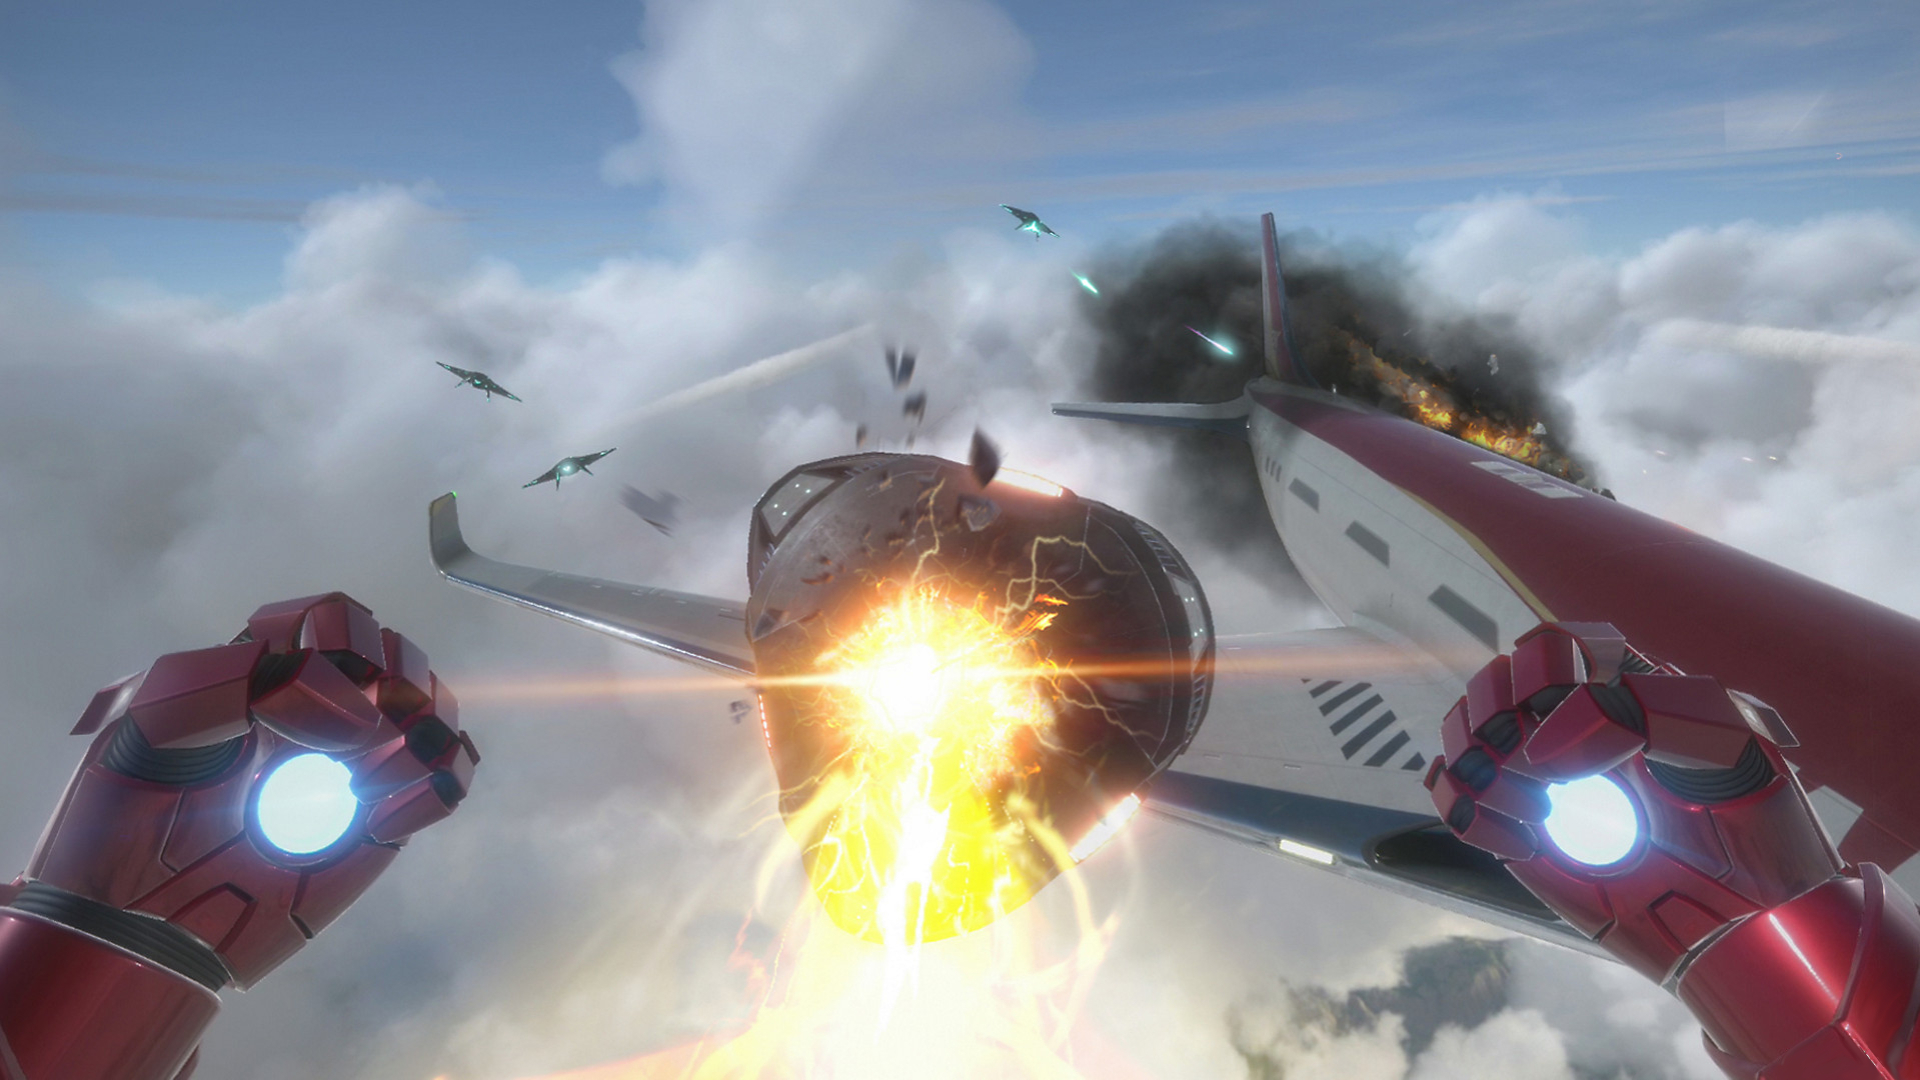 Best PS VR games: Iron man is seen fighting something above a plane